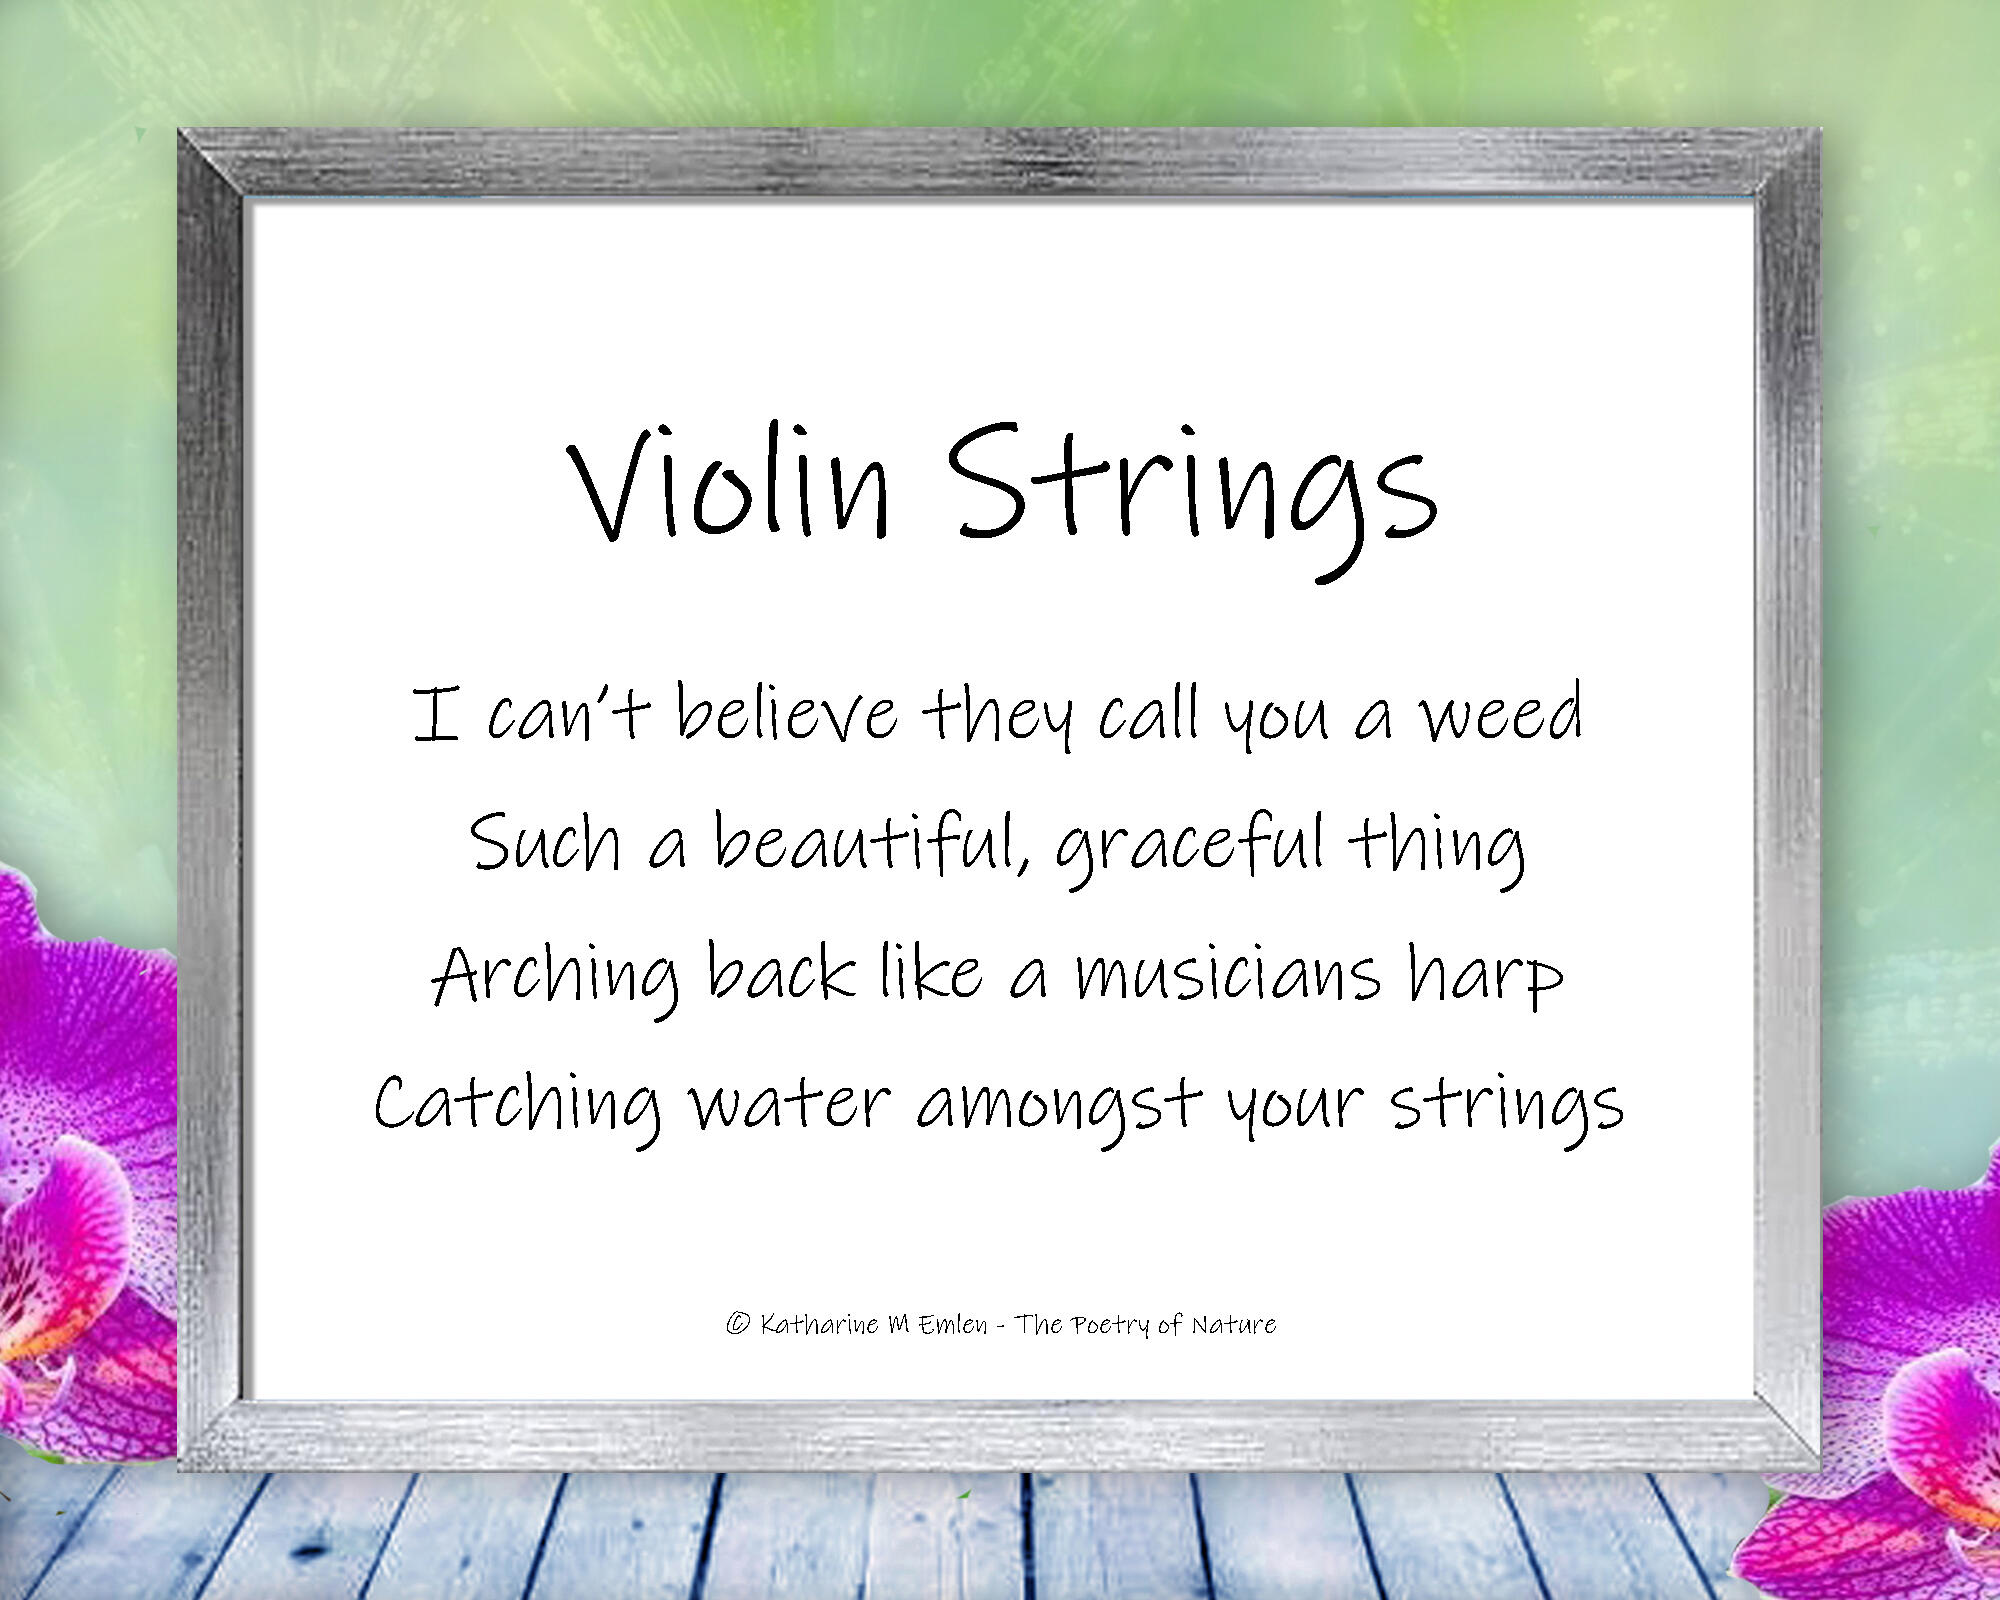 Poem for Violin Strings - A sprig of wheat catches the morning dew in this peaceful, soothing, nature print with poem - Violin Strings by The Poetry of Nature